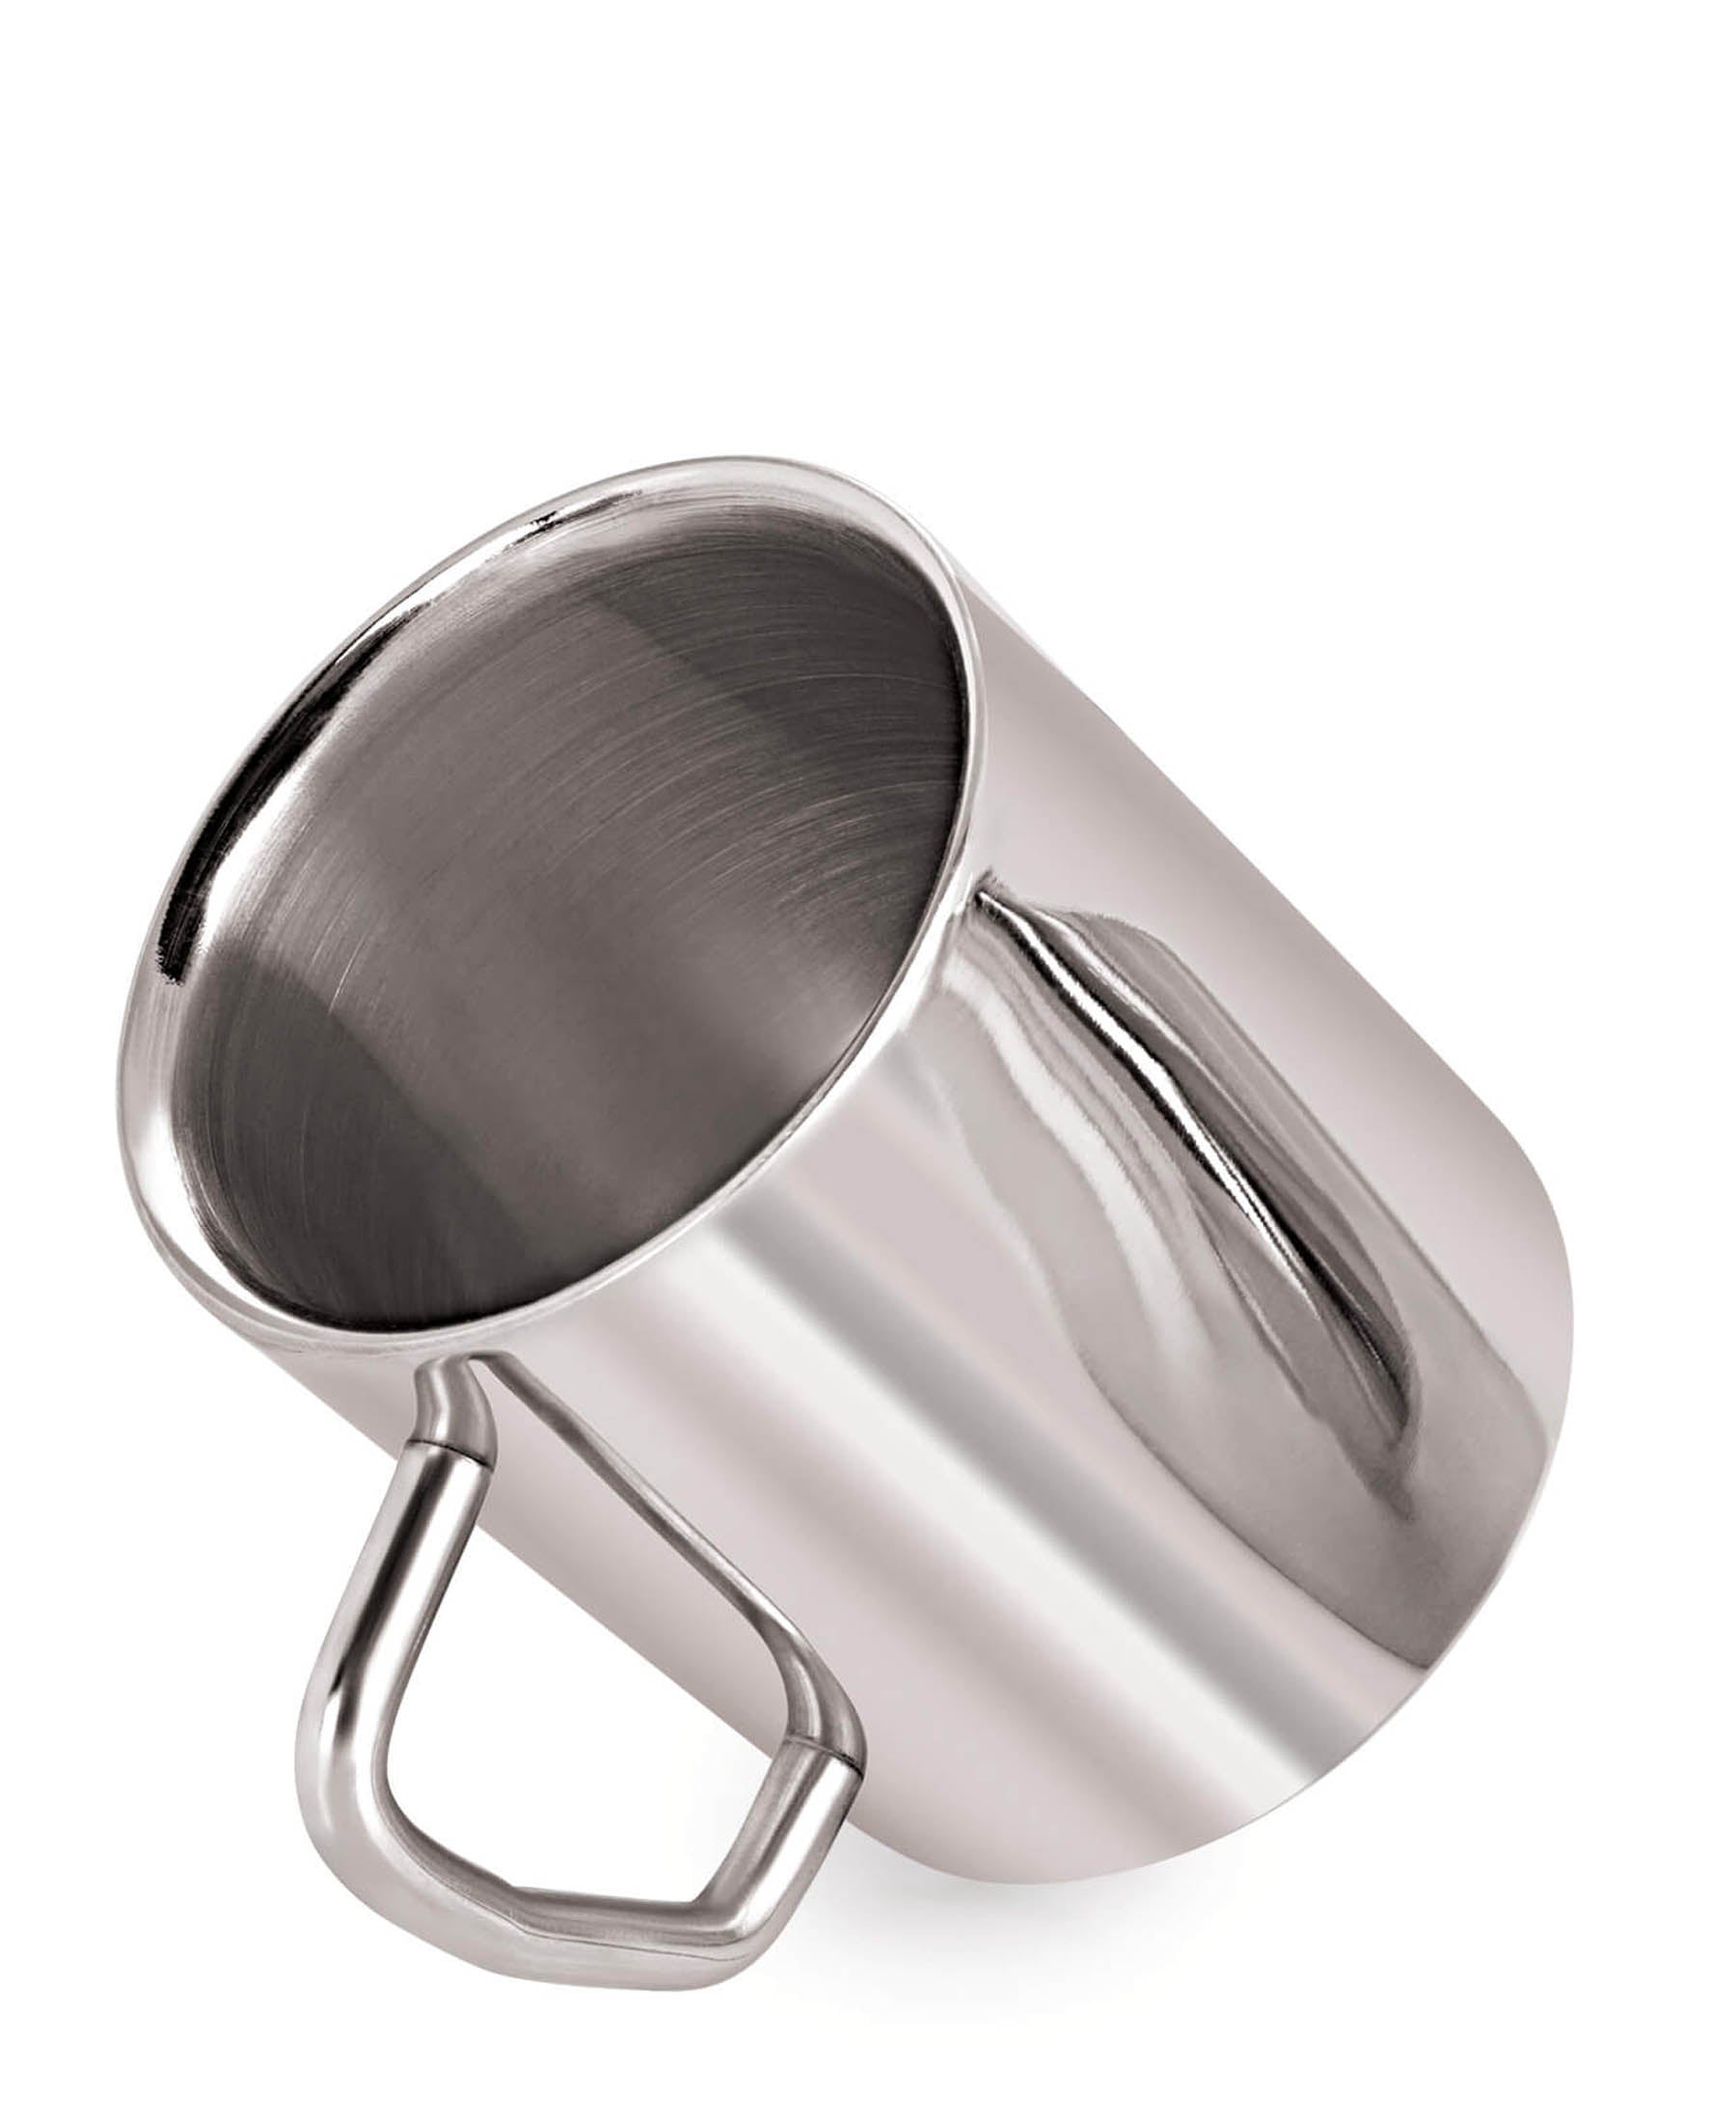 Kitchen Life Stainless Steel Double Wall Mug 300ML - Silver